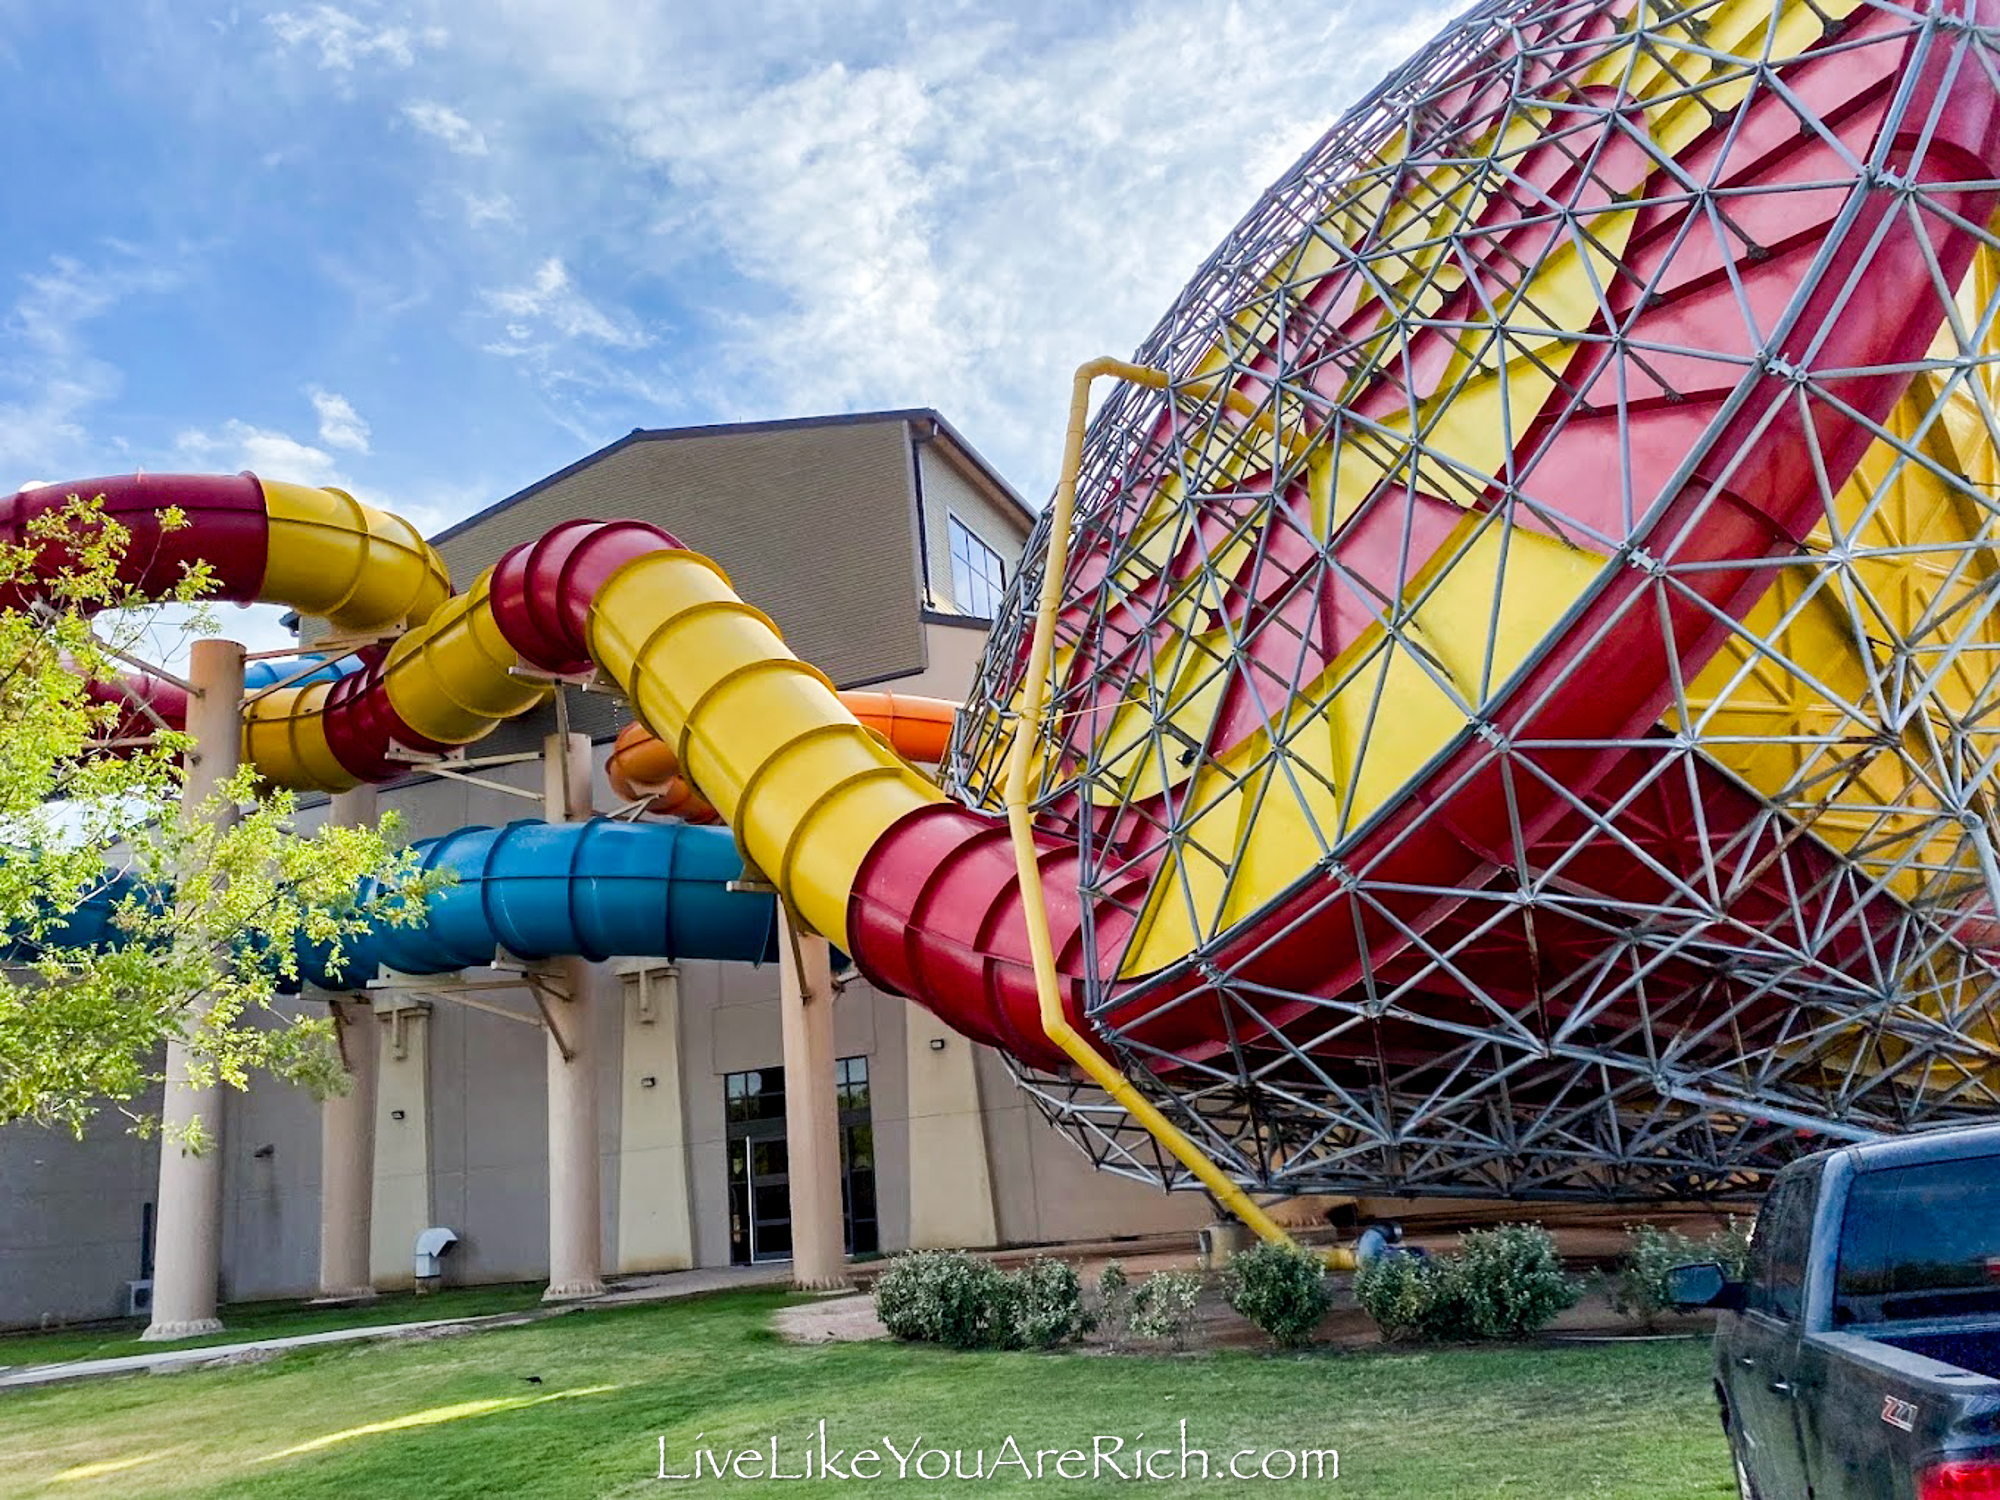 How to Save Money at The Great Wolf Lodge in Grapevine, TX